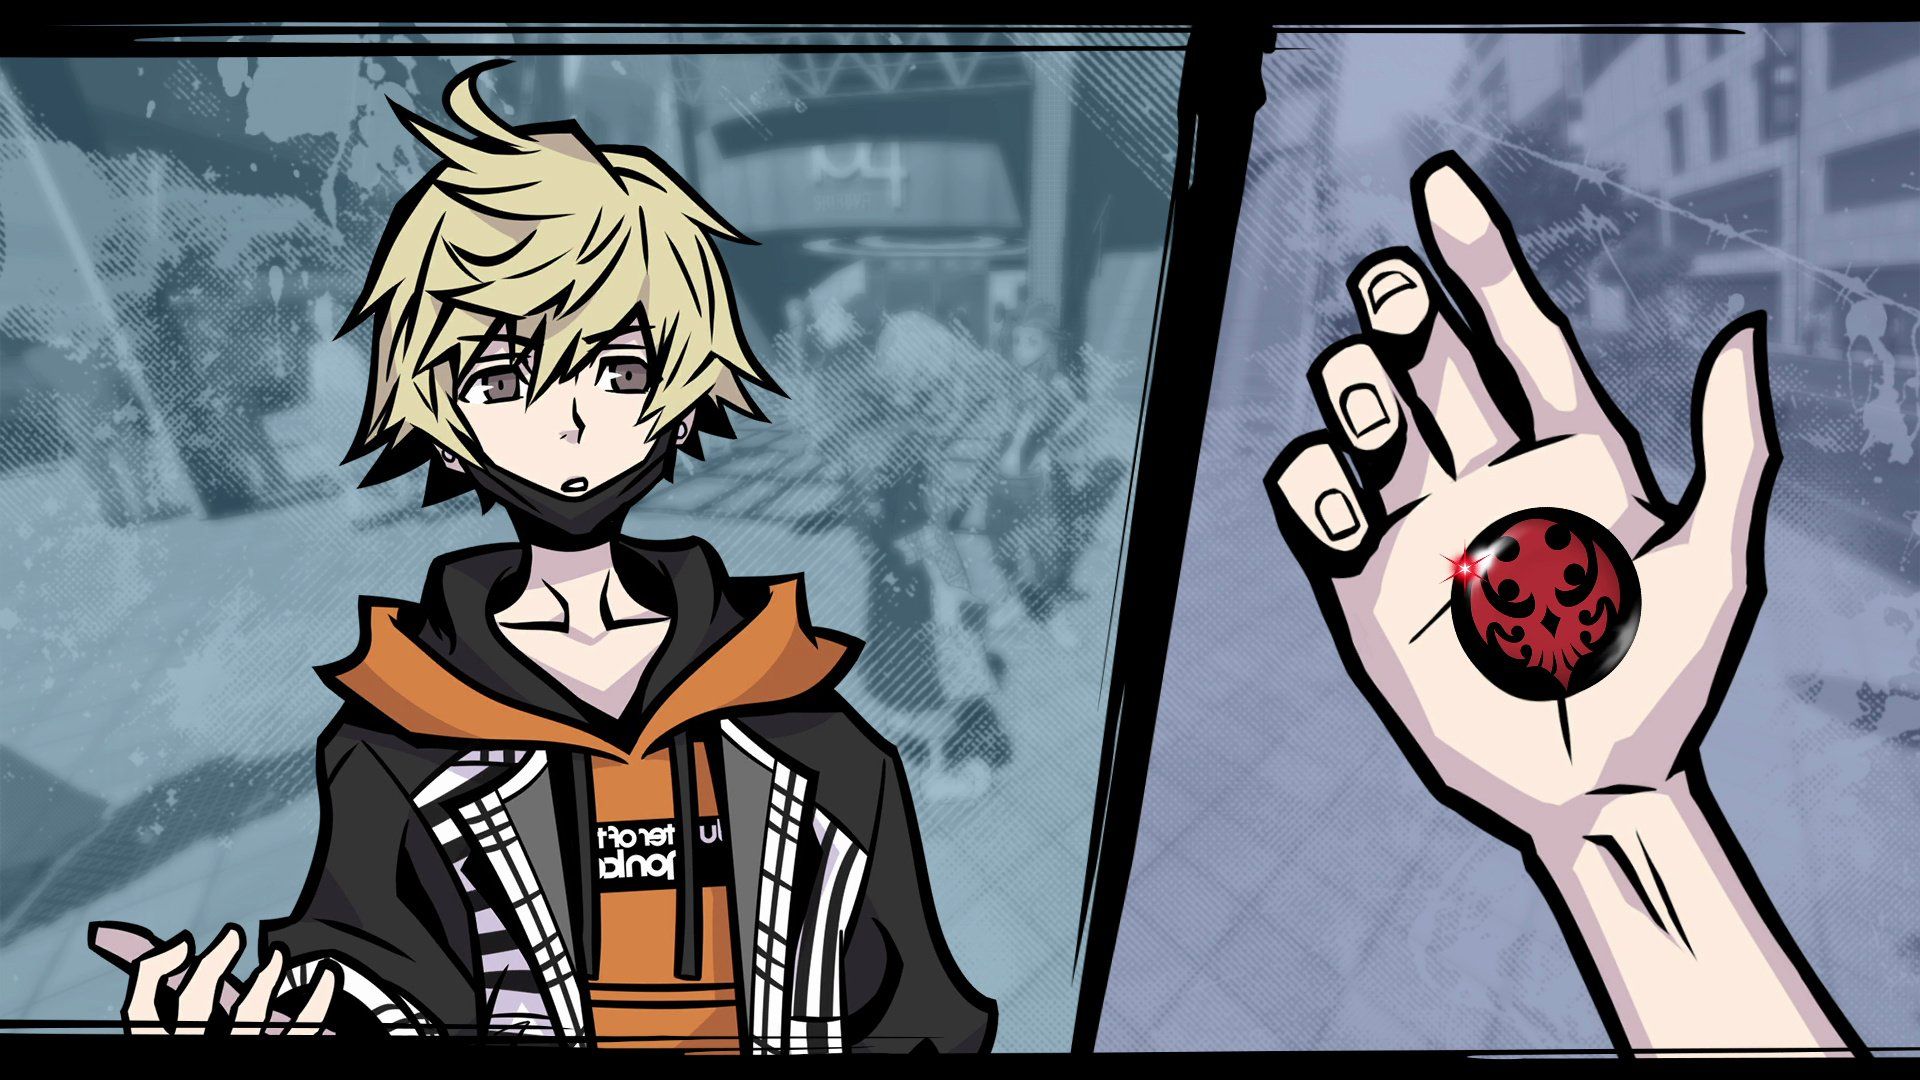 Hands On: NEO: The World Ends With You Brings a Stylish Afterlife to PS4